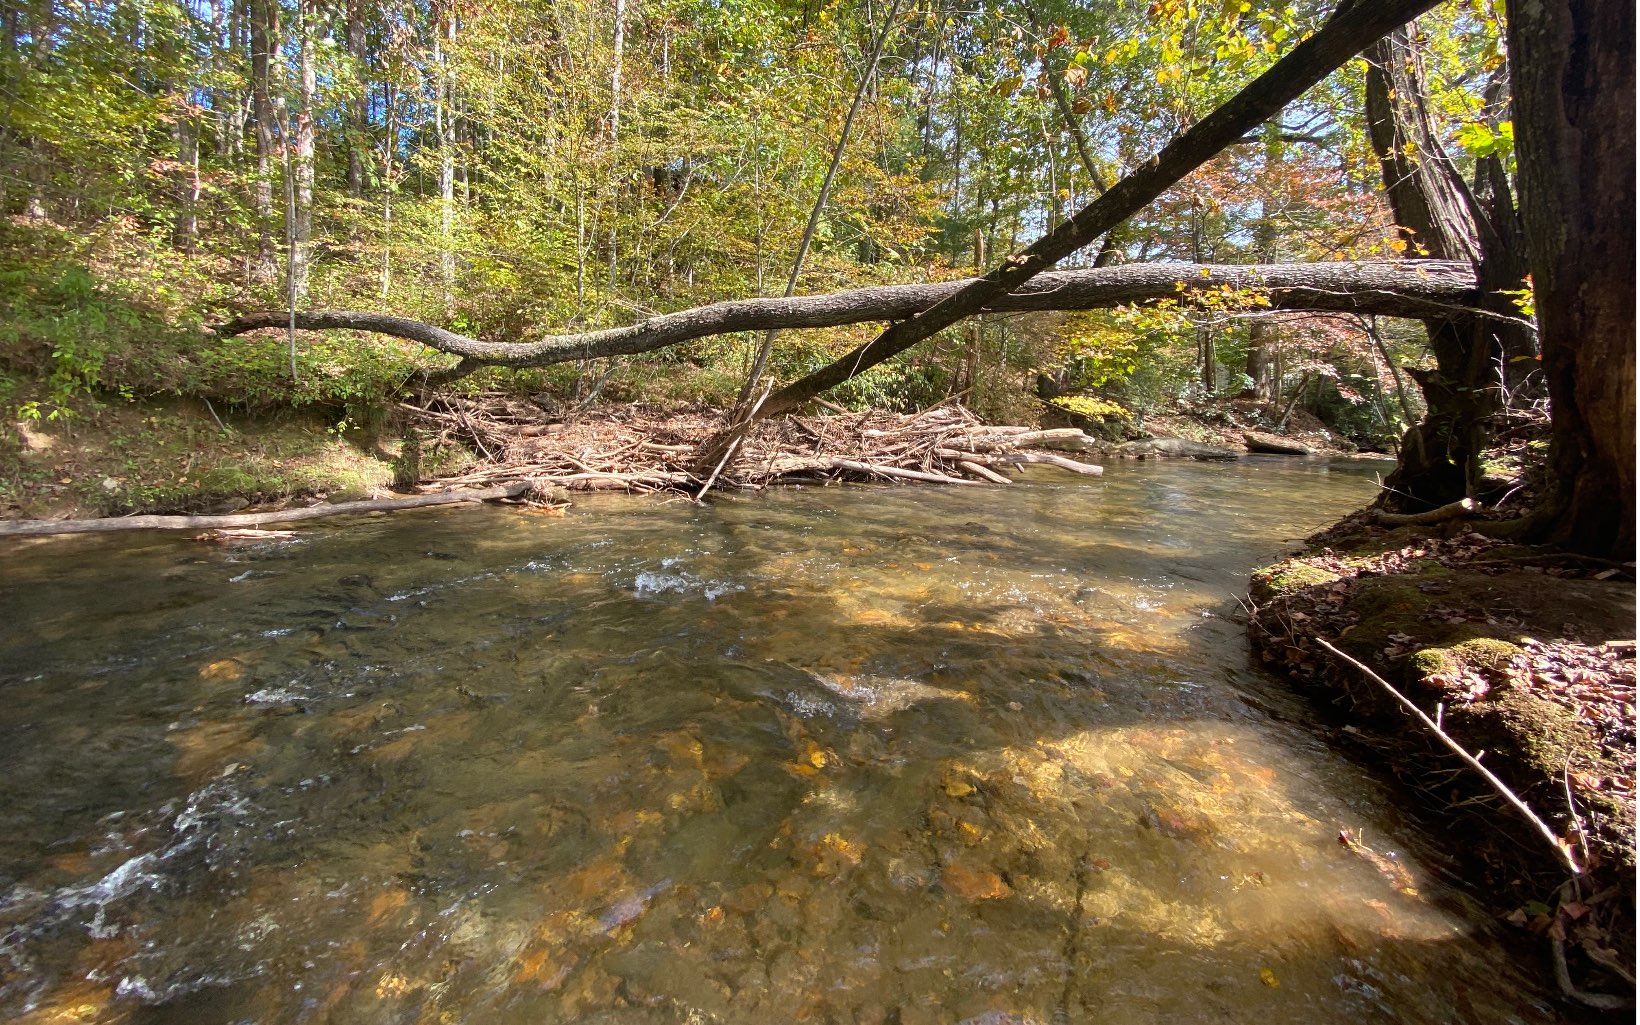 ATTENTION TROUT AND OUTDOOR ENTHUSIASTS! Imagine owning 10.64 unrestricted acres with 890 ft of frontage on the sought after Fightingtown Creek. This stunning land is mostly flat pasture with cleared and easy accesses into the creek. A new poured foundation sits back in the woods out of flood plain with spectacular mountain views and a 4 BR septic in place. Bubbling springs are also present on the property, ideal for a pond. Road has been cut and graveled leading into the property. Custom blue prints available with full price offer. Whether you want a large tract all to yourself or want to divide, this property has much to offer! Conveniently located less than 10 minutes to downtown Blue Ridge!!